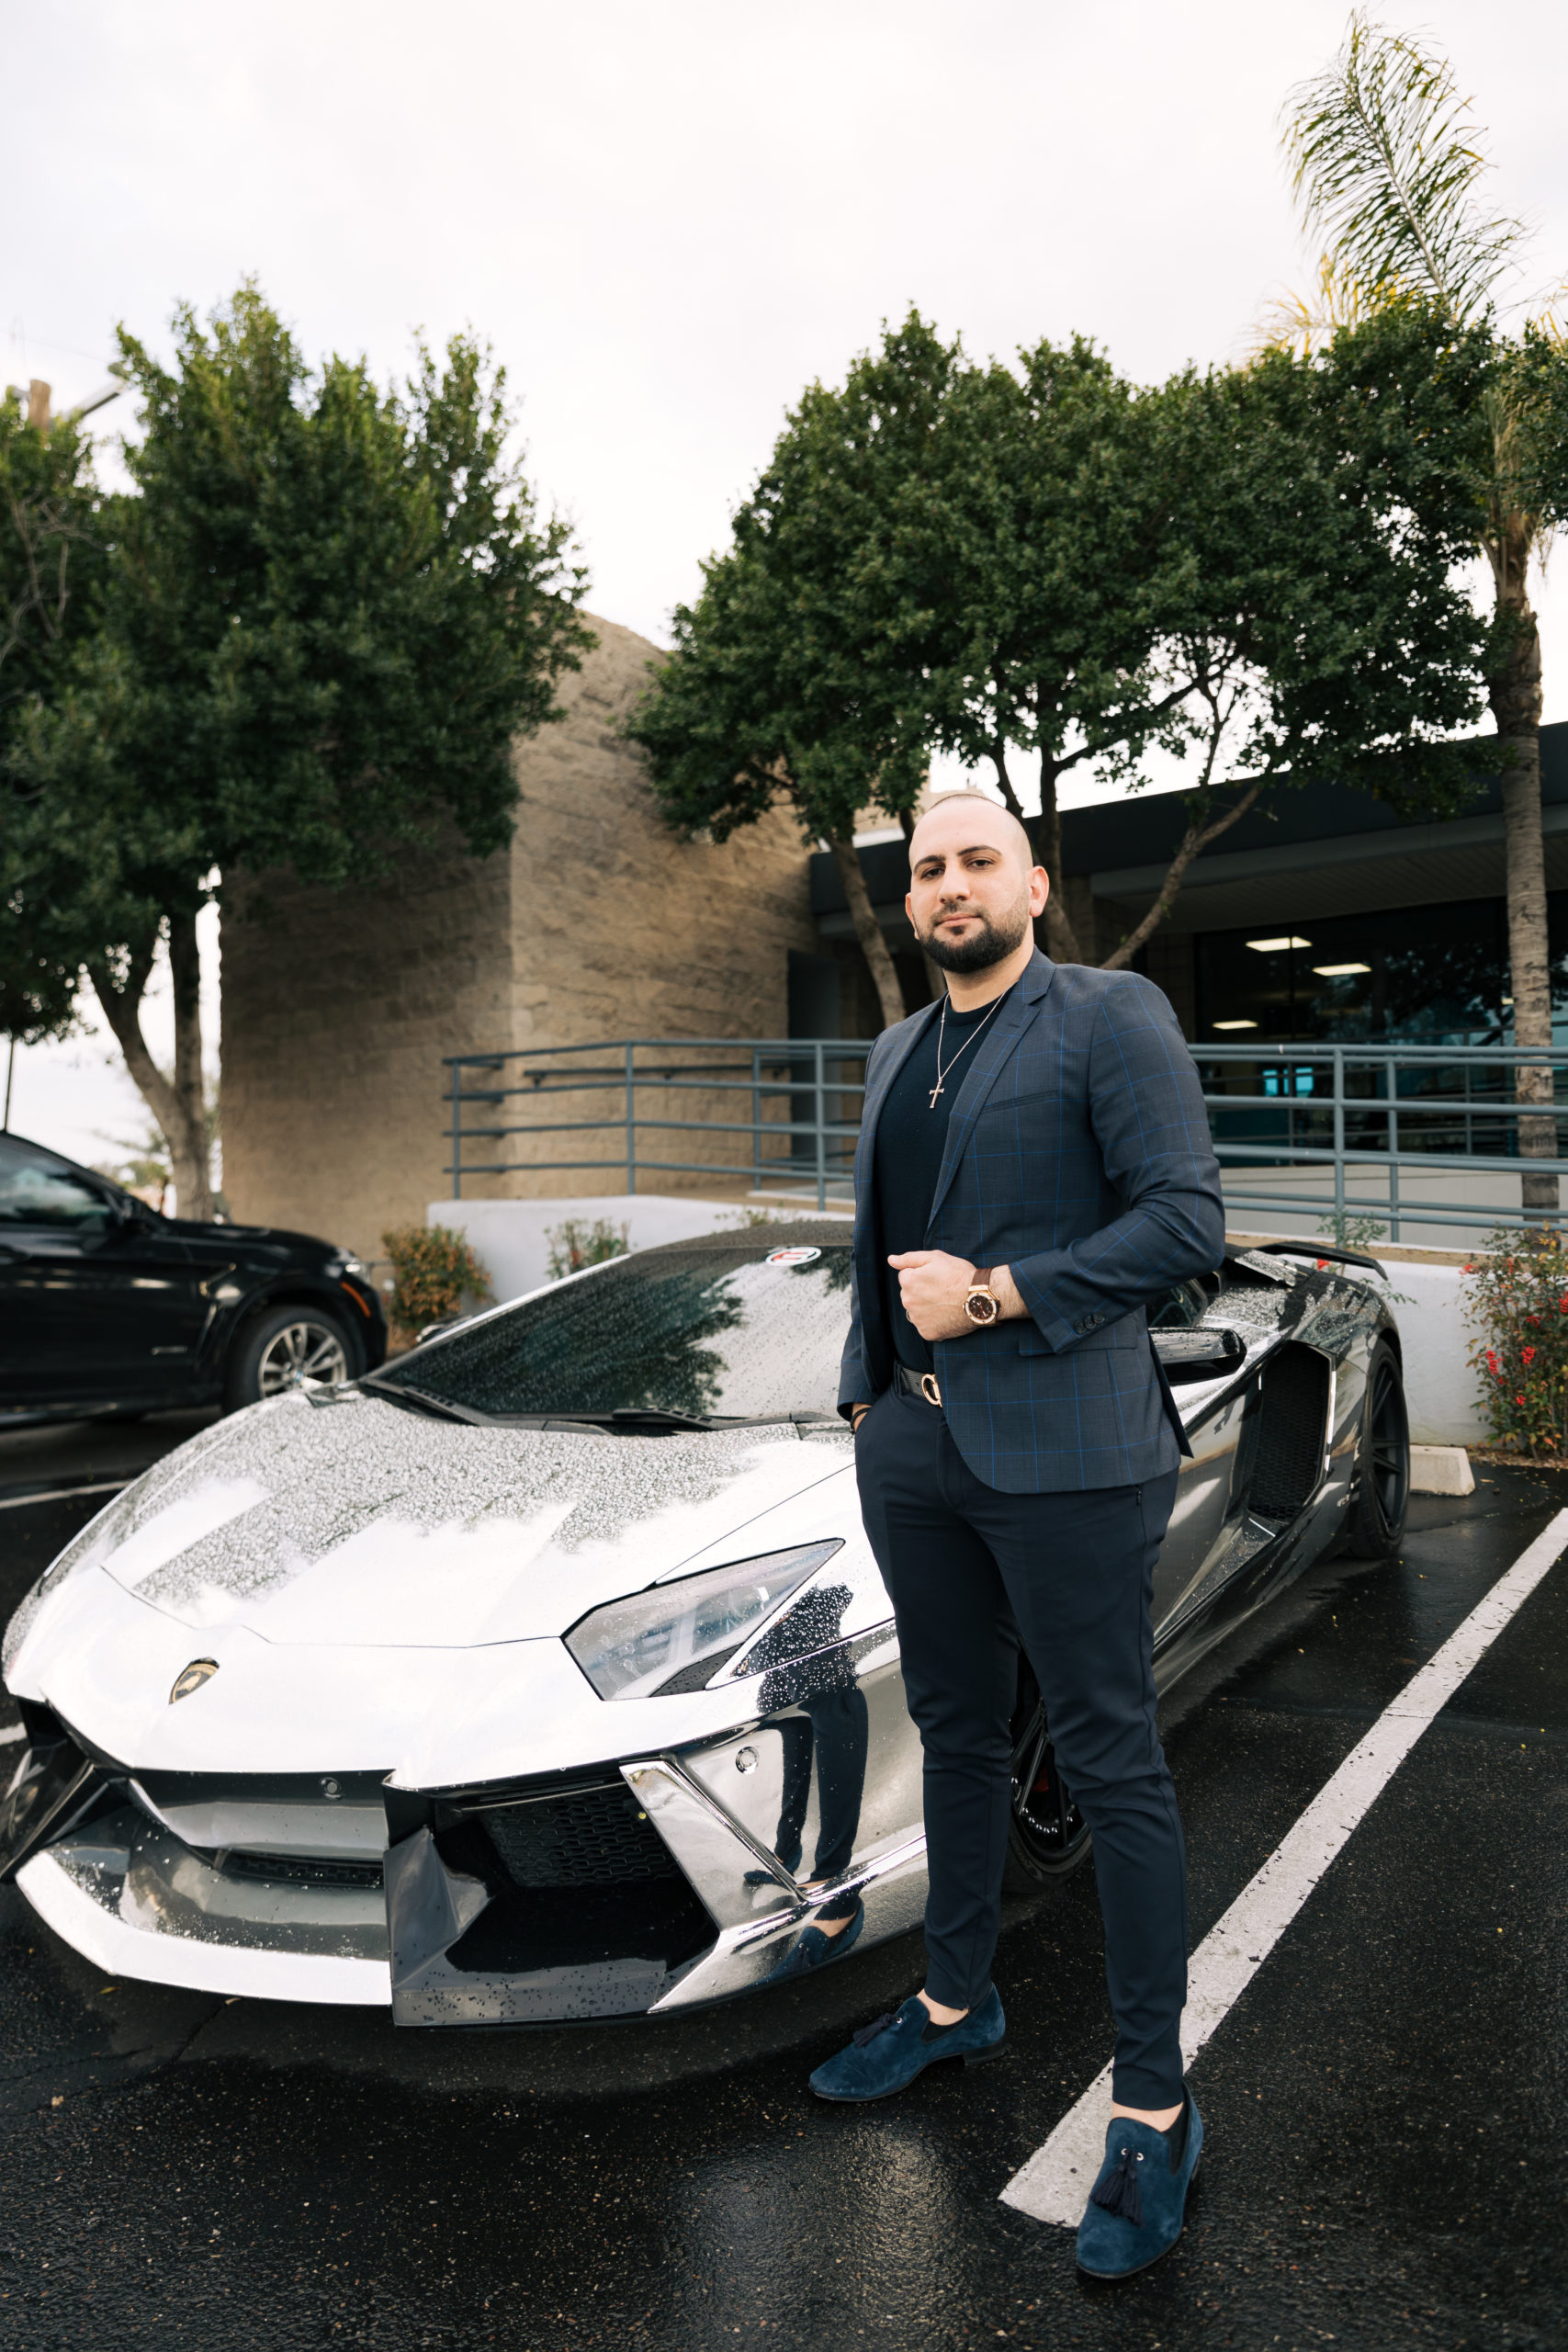 Sal Shakir Is A Multi-Millionaire who Helps People To Achieve Financial Freedom & Overcome Barriers